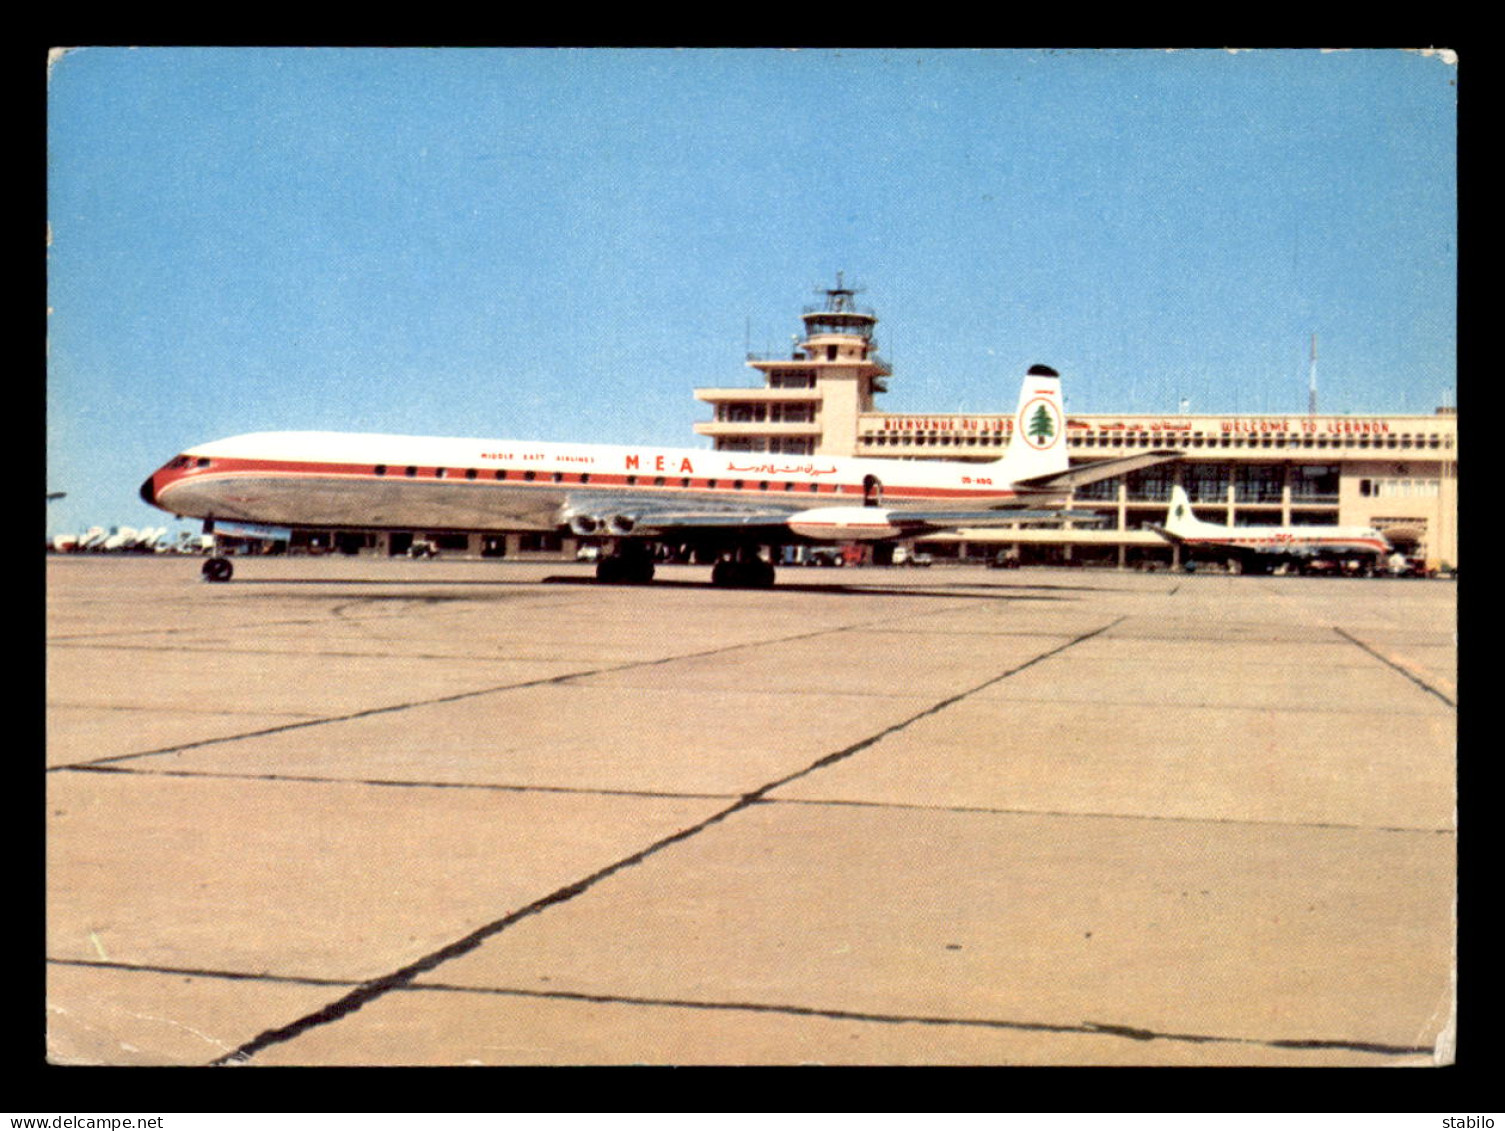 LIBAN - BEYROUTH - AIRPORT INTERNATIONAL - A MIDDLE EAST AIRLINES CIE MEA - AVION COMET 4C - Libanon